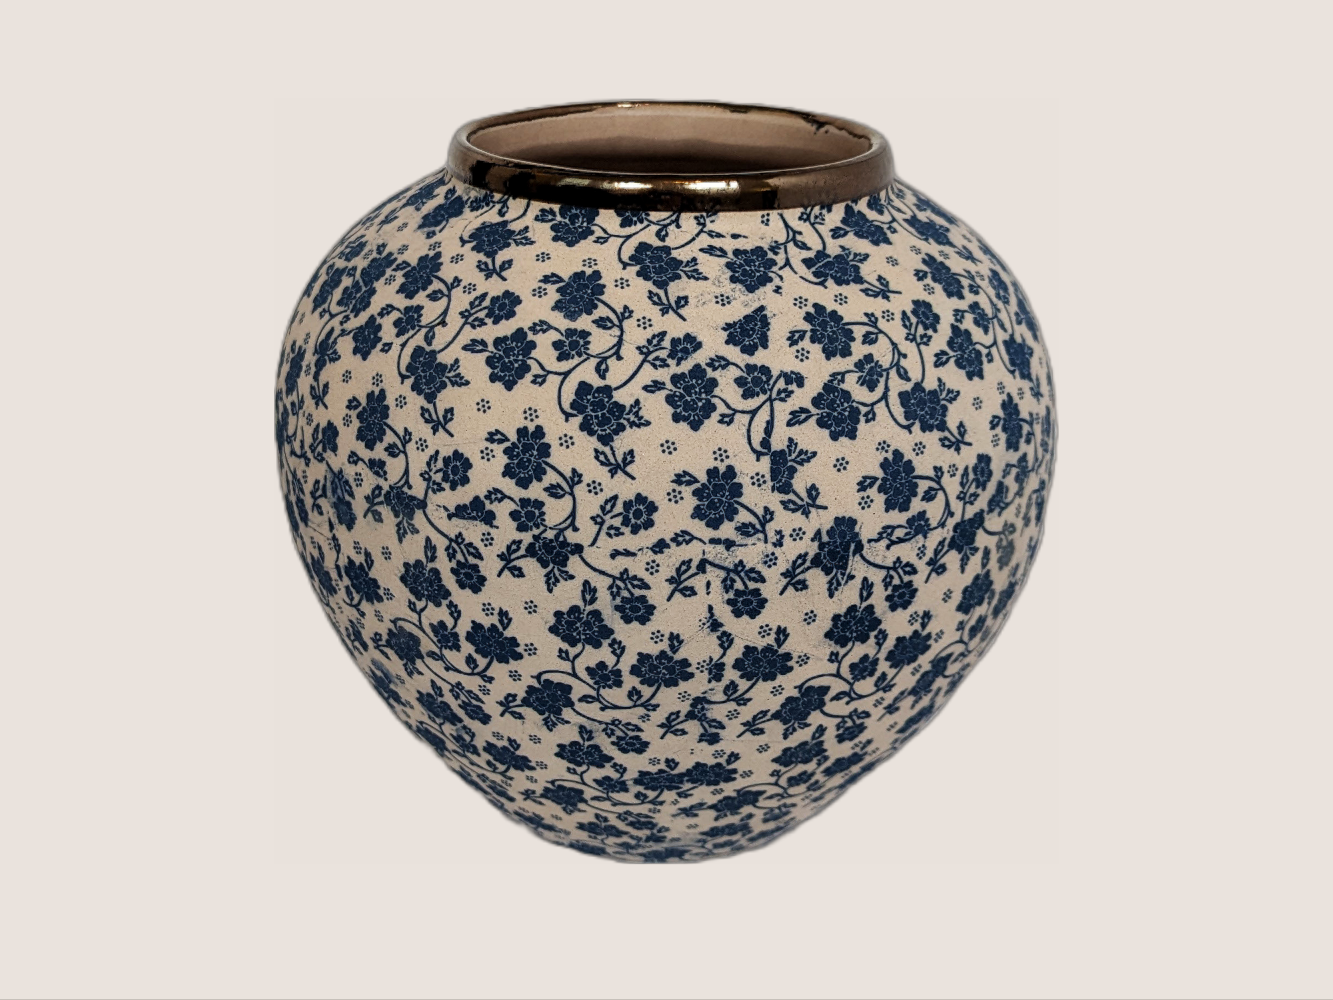 Round ivory and blue floral decal vase with gold rim accent for home decor. Features underglaze effect and matte finish. Handmade.